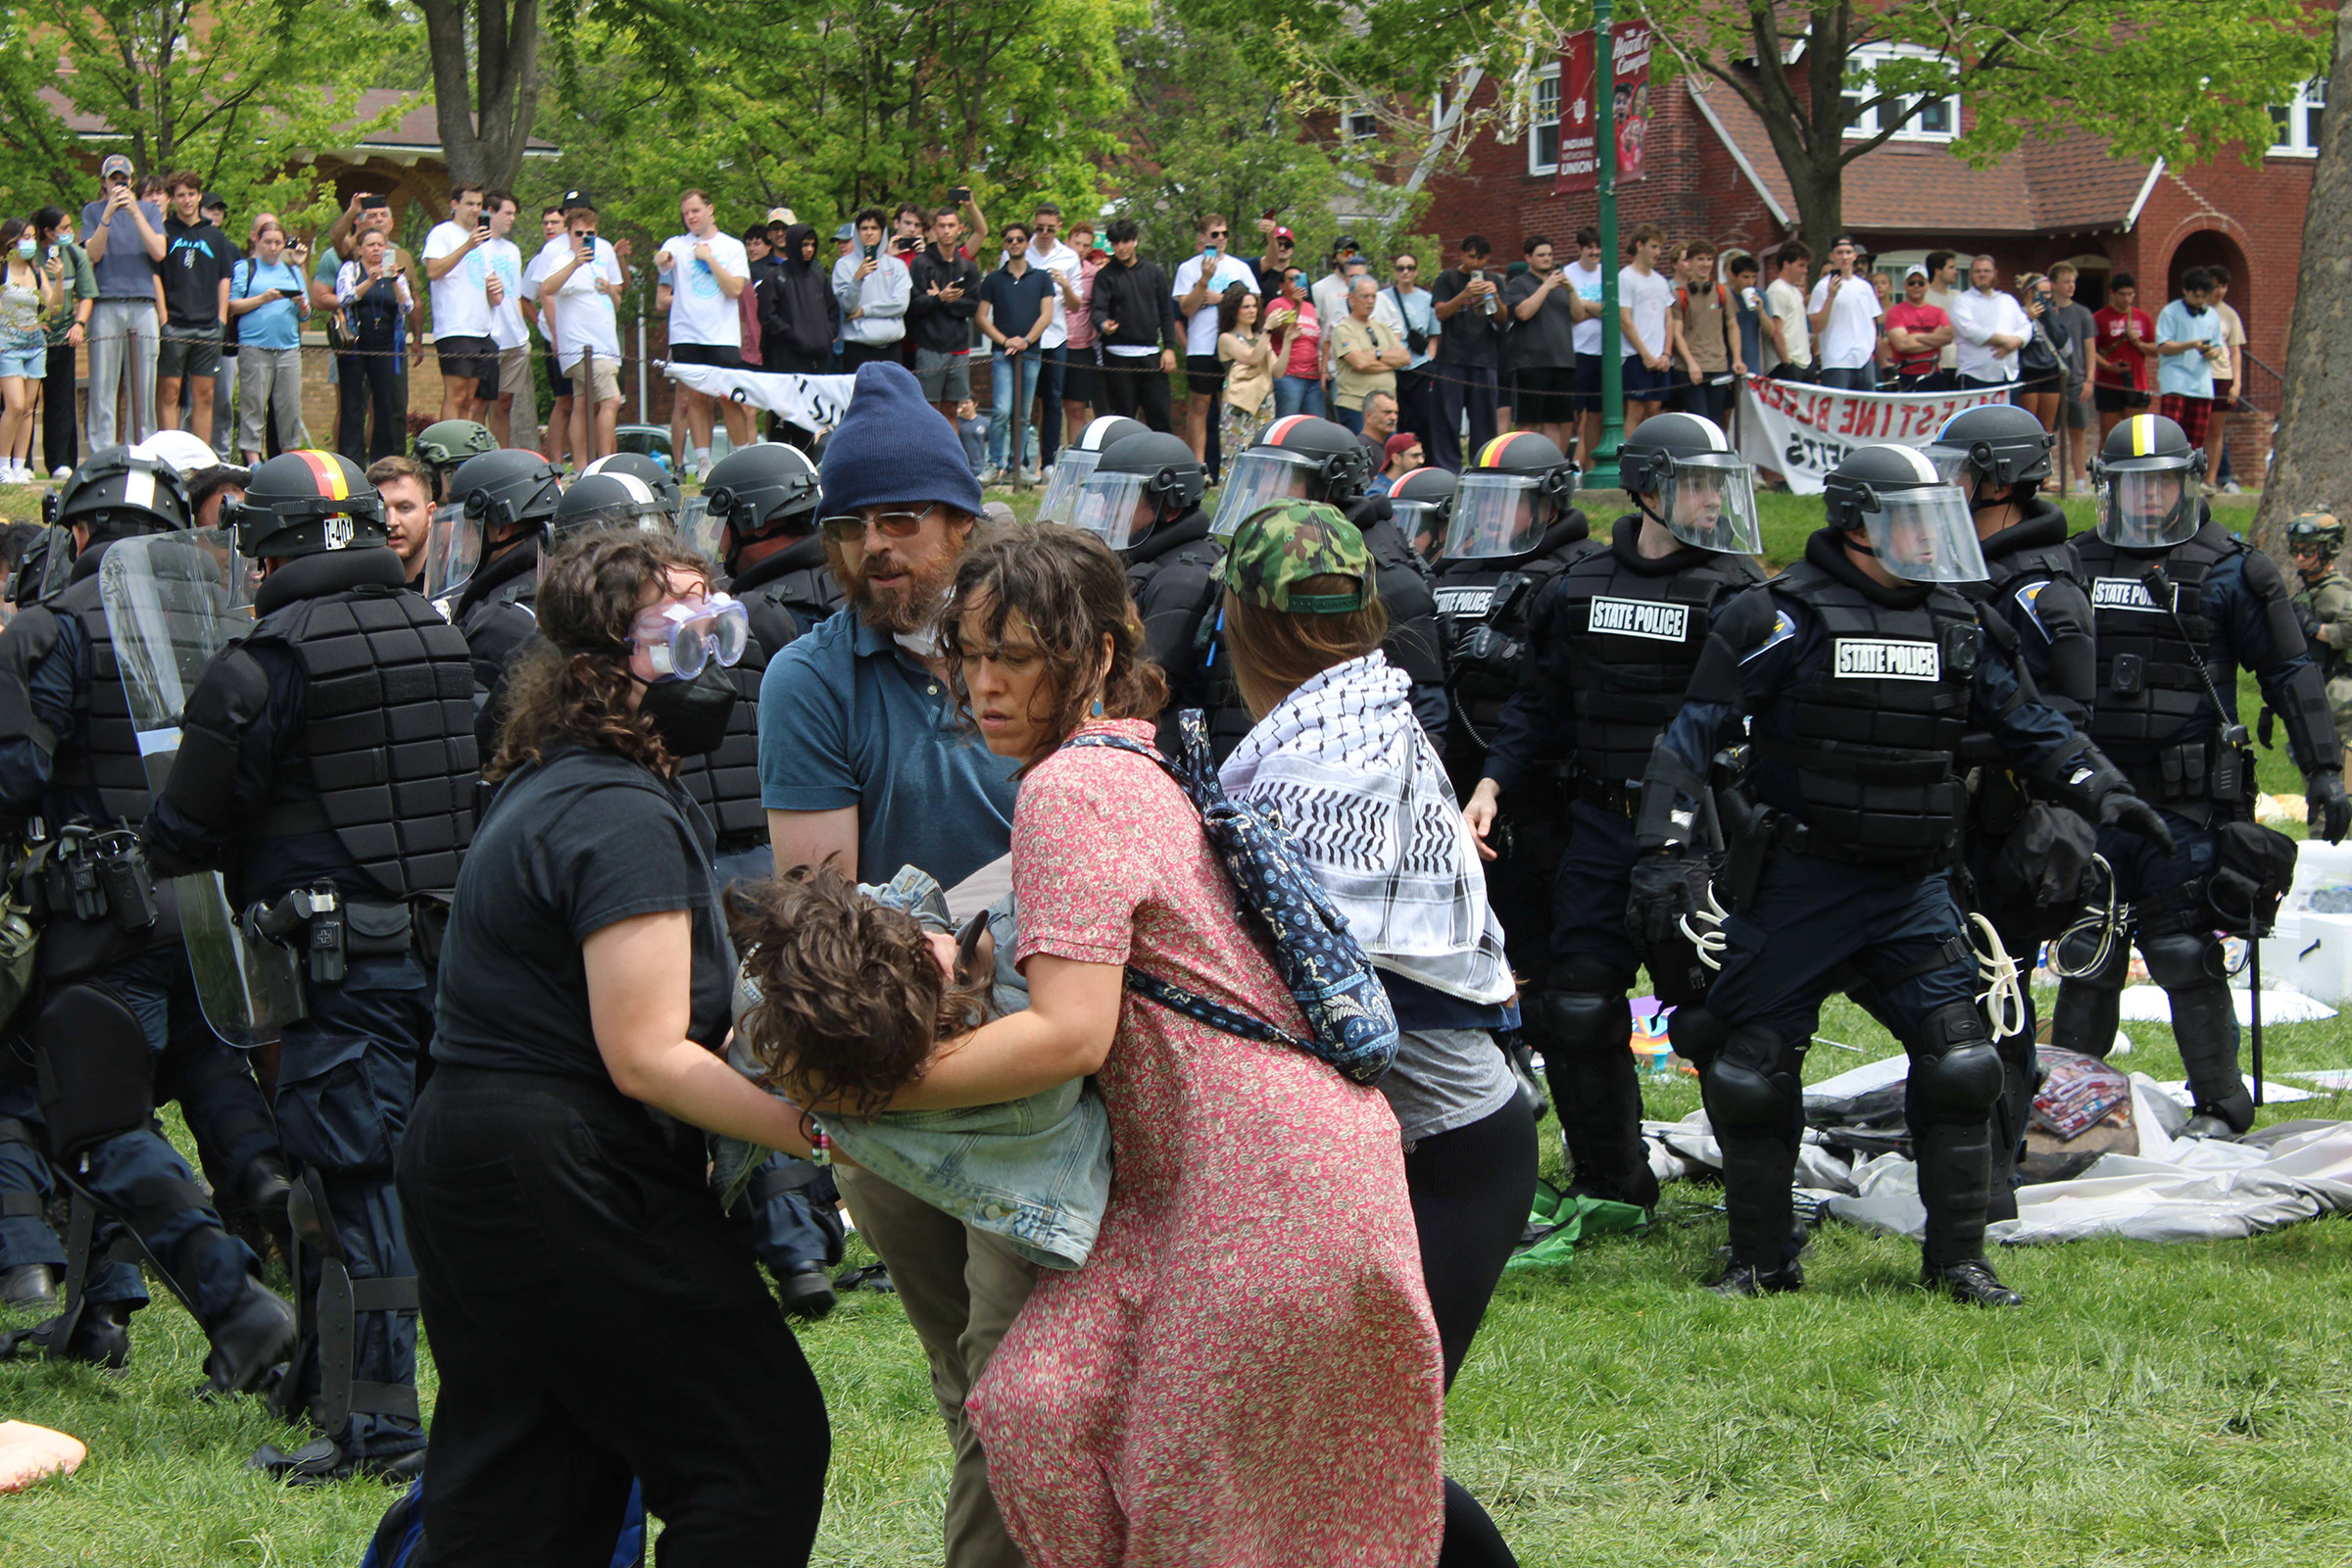 A medic and three demonstrators help a protester to the ground while Indiana State Police clear the encampment on April 27. There was a rotating crew of medics at the encampment.